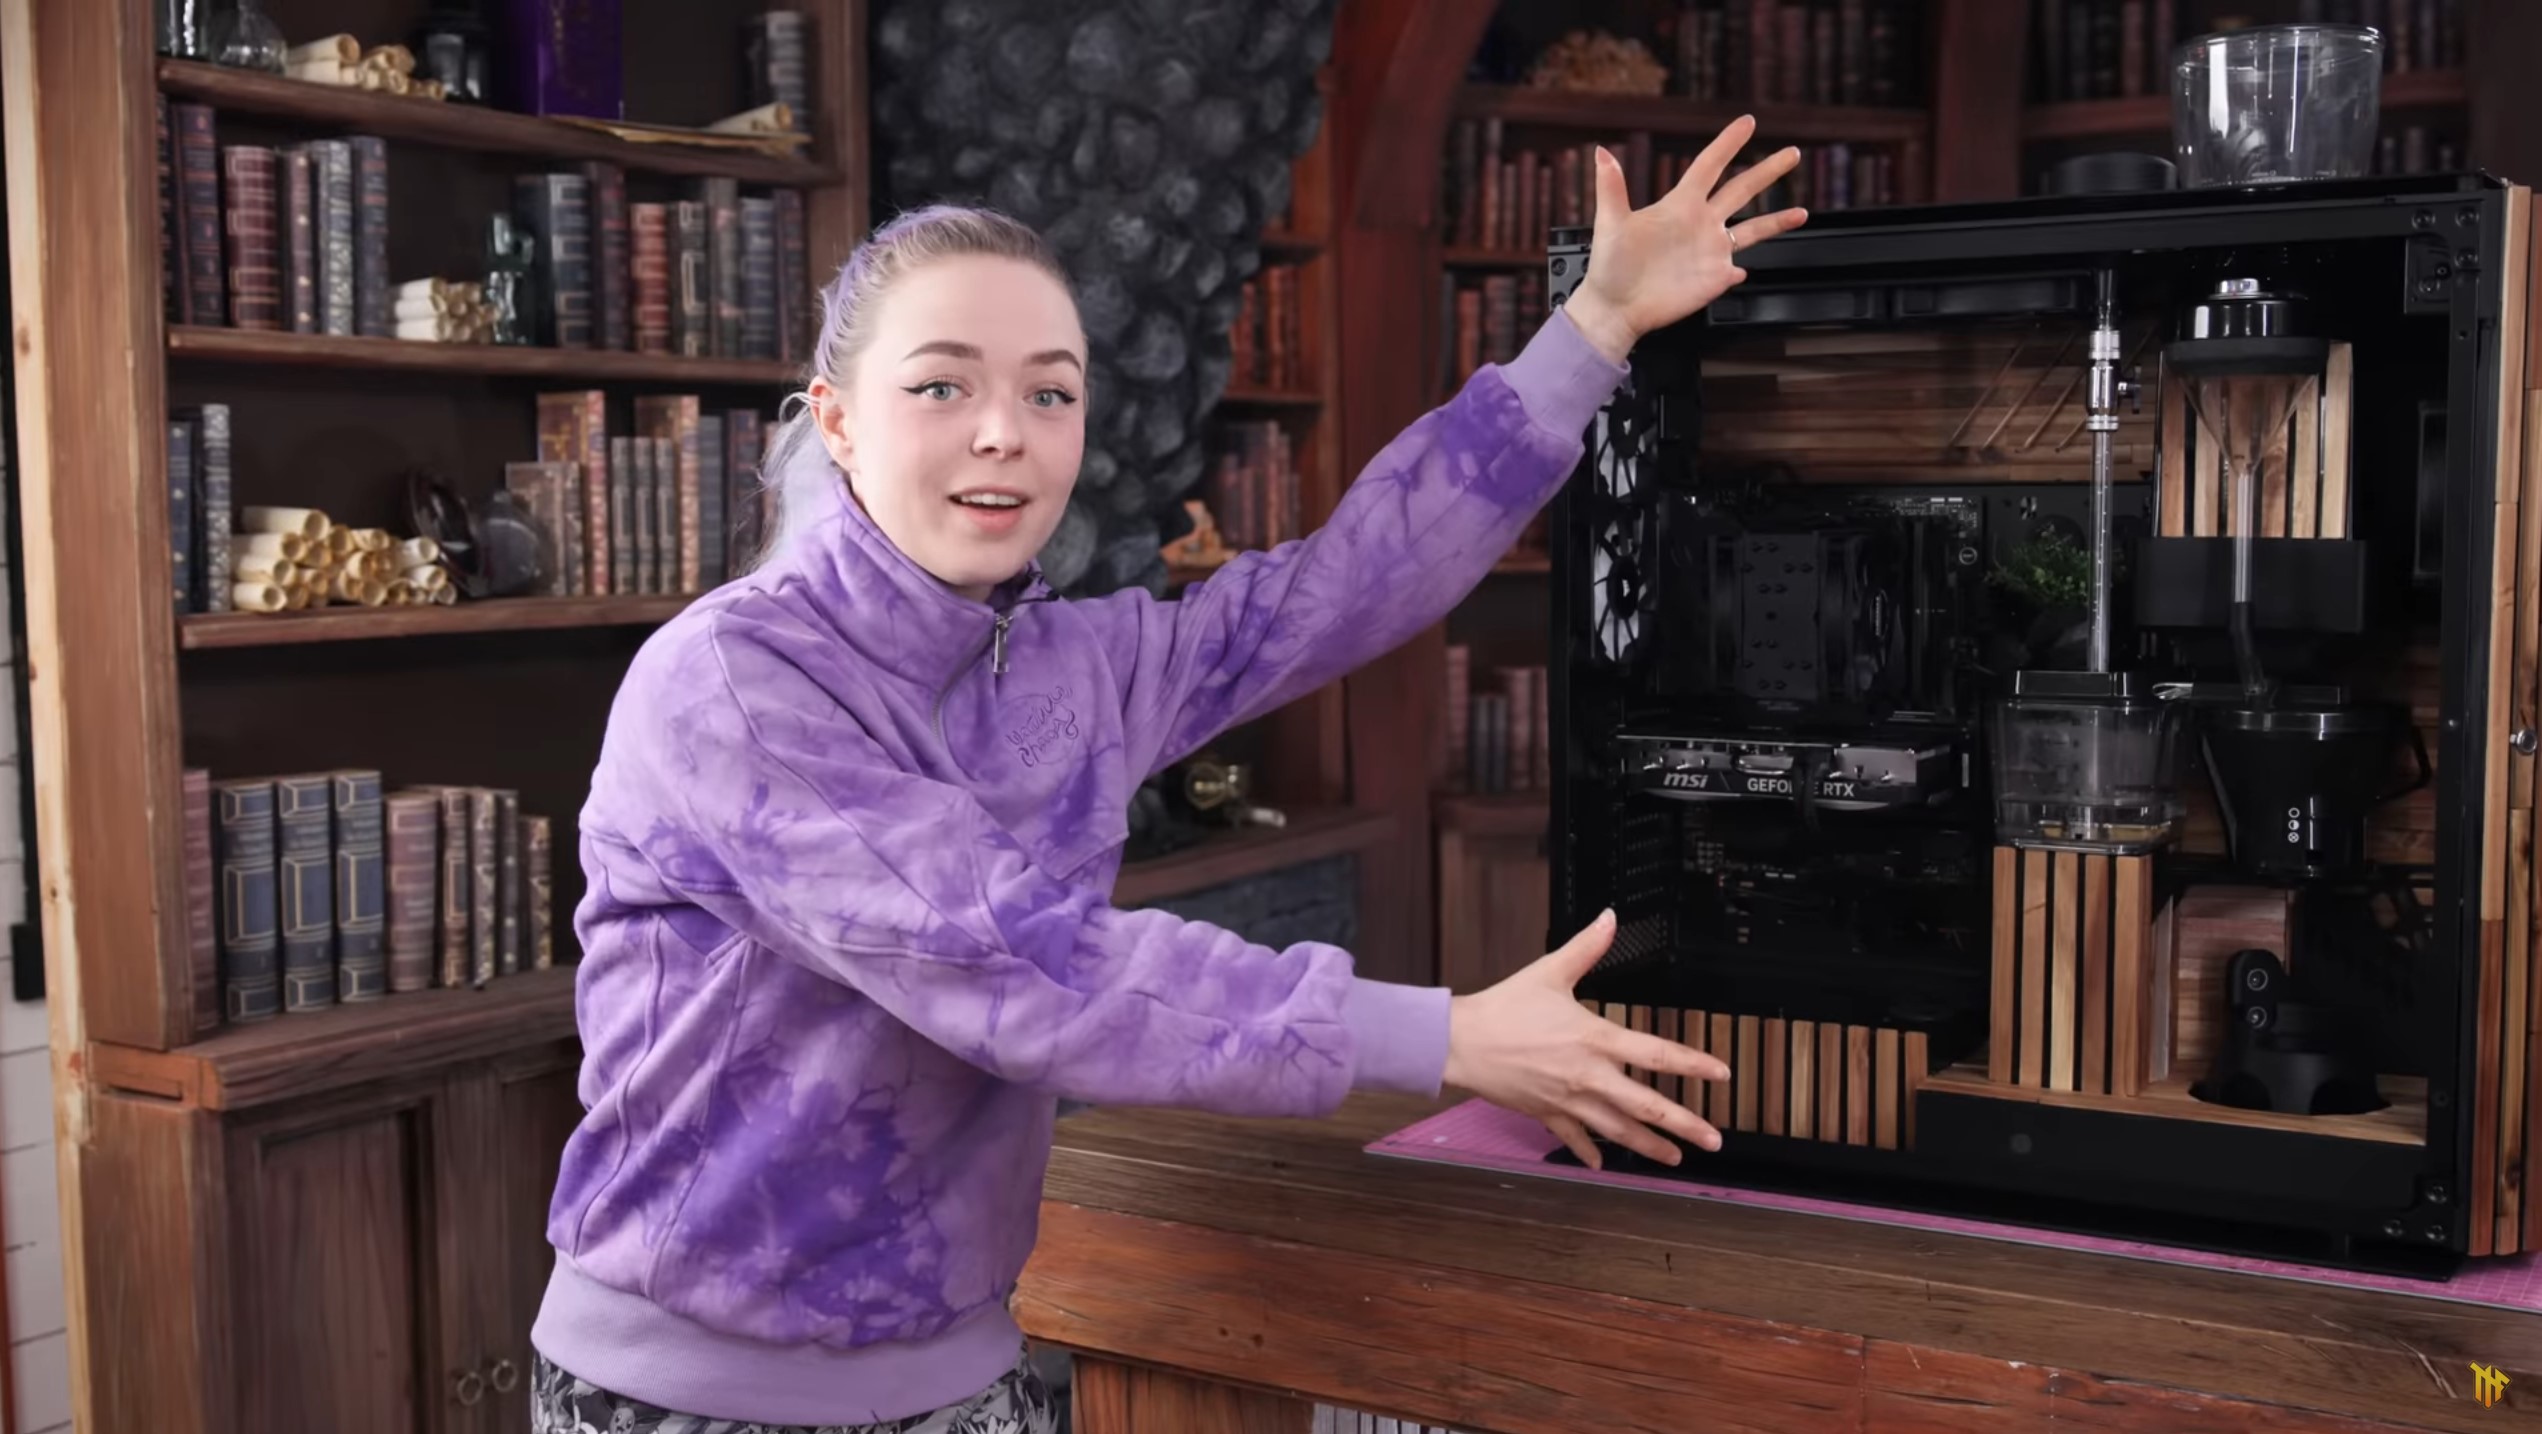 Martina of Nerdforge stands next to a custom gaming PC.